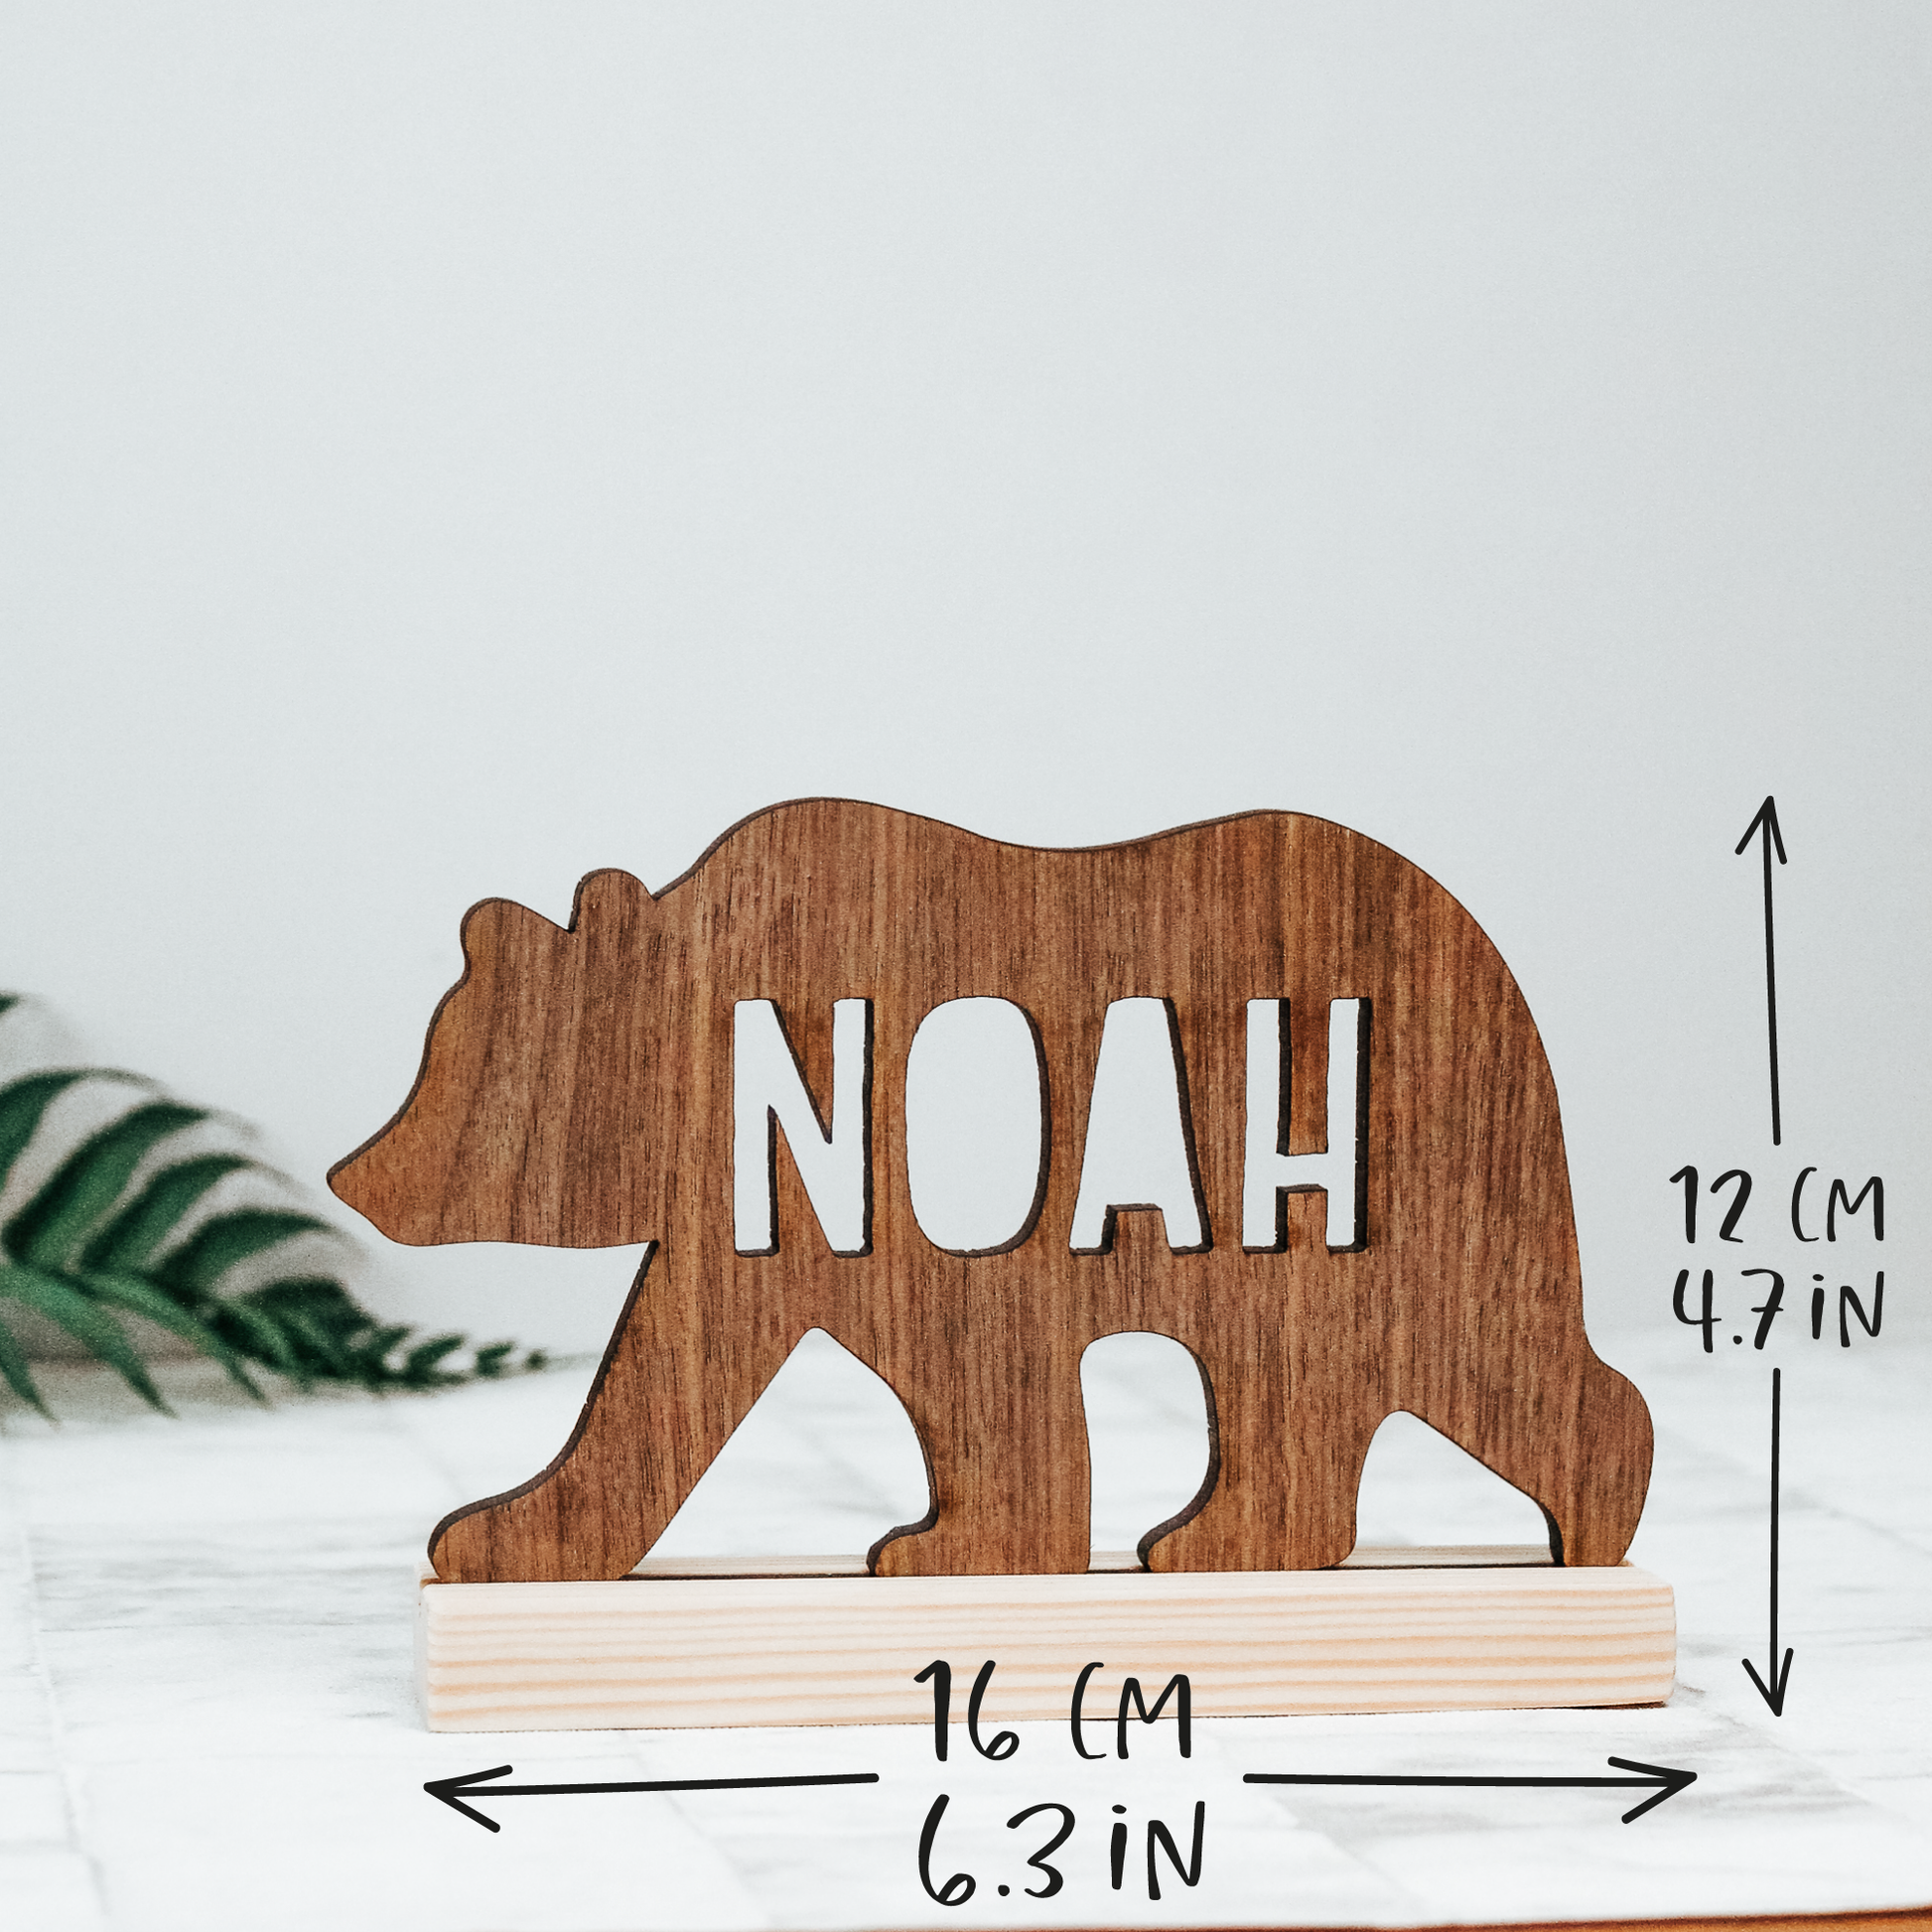 wooden bear silhouette shelf decoration with personalised name, size image 16cm by 12cm 